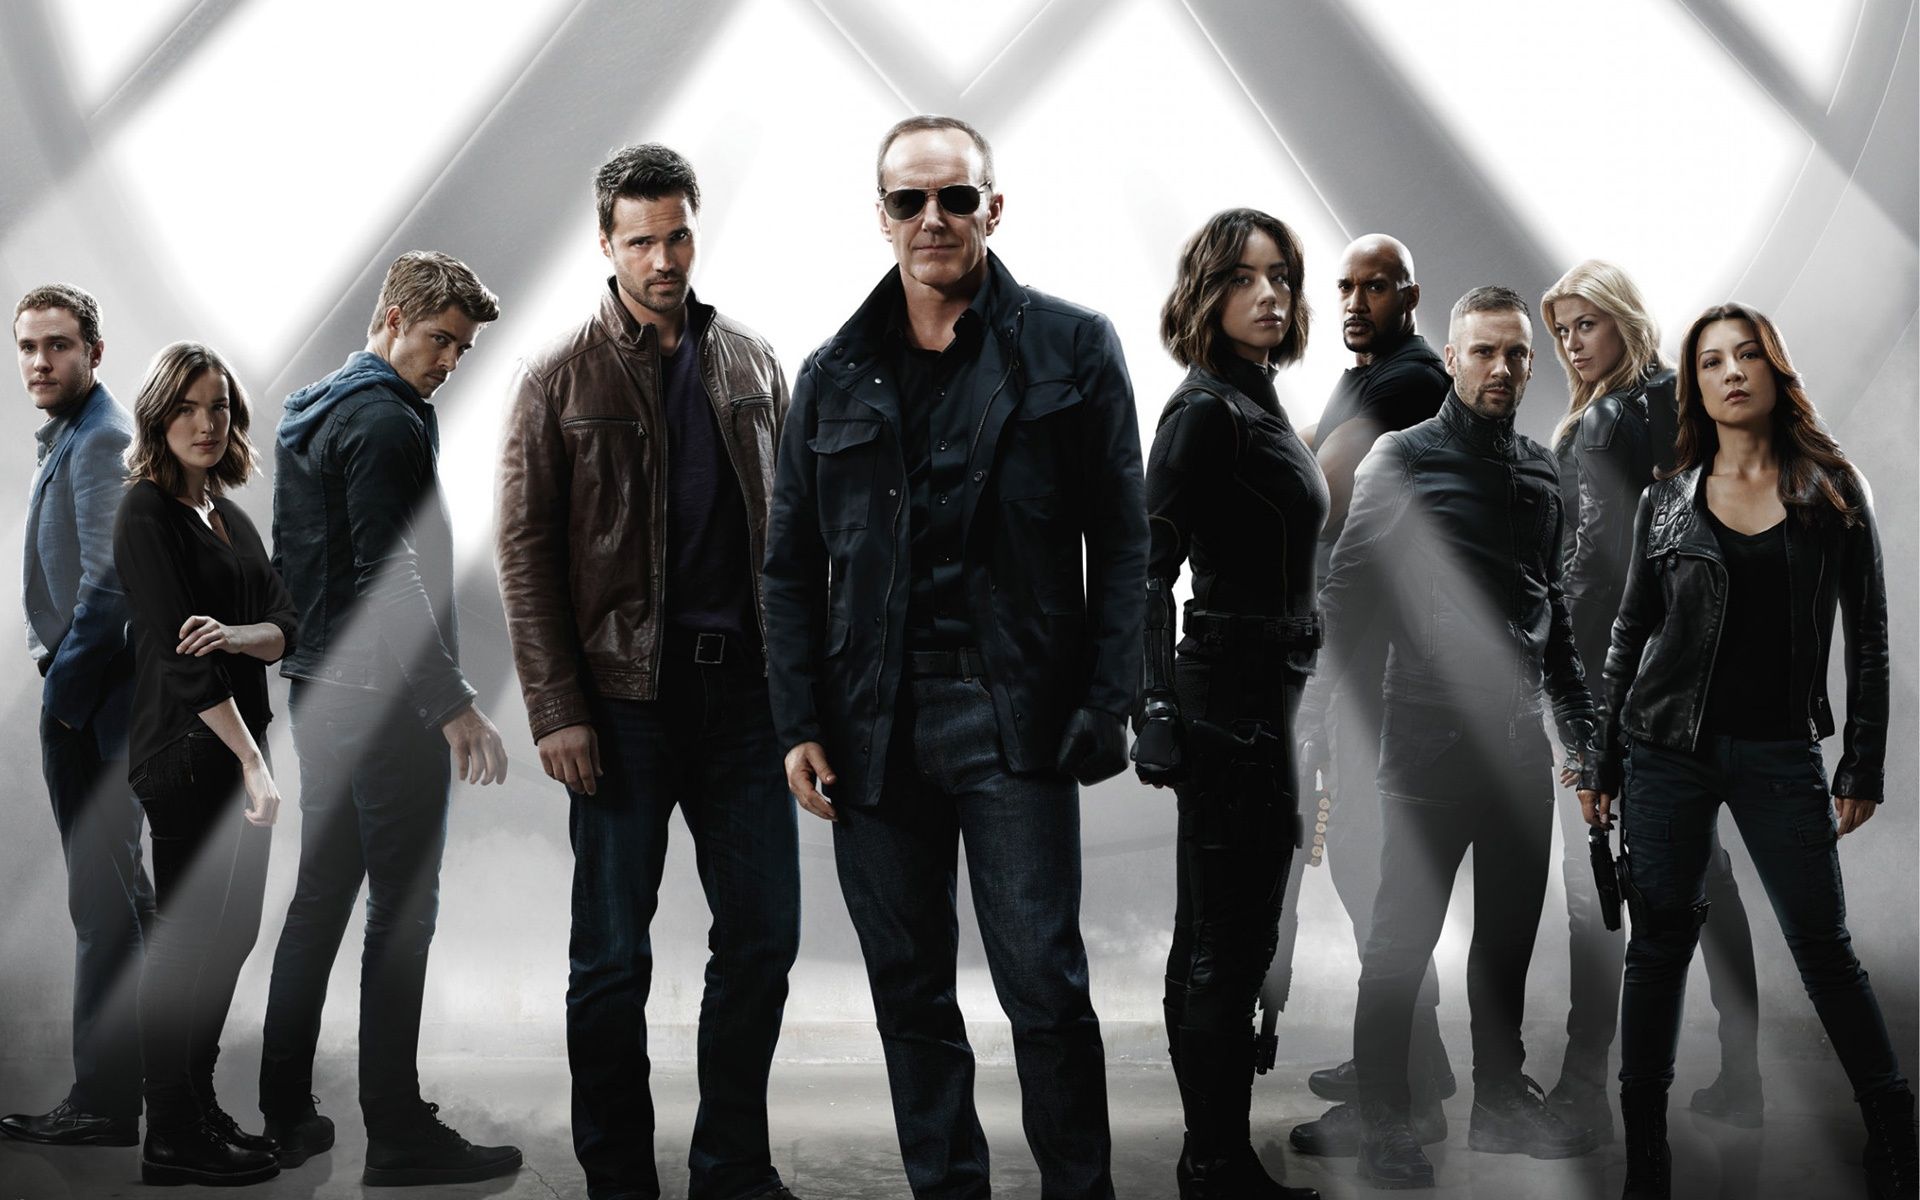 Literally an image of the cast of Marvel's Agents of SHIELD. If this shit makes the frontpage, then we've truly lost all hope for this show.